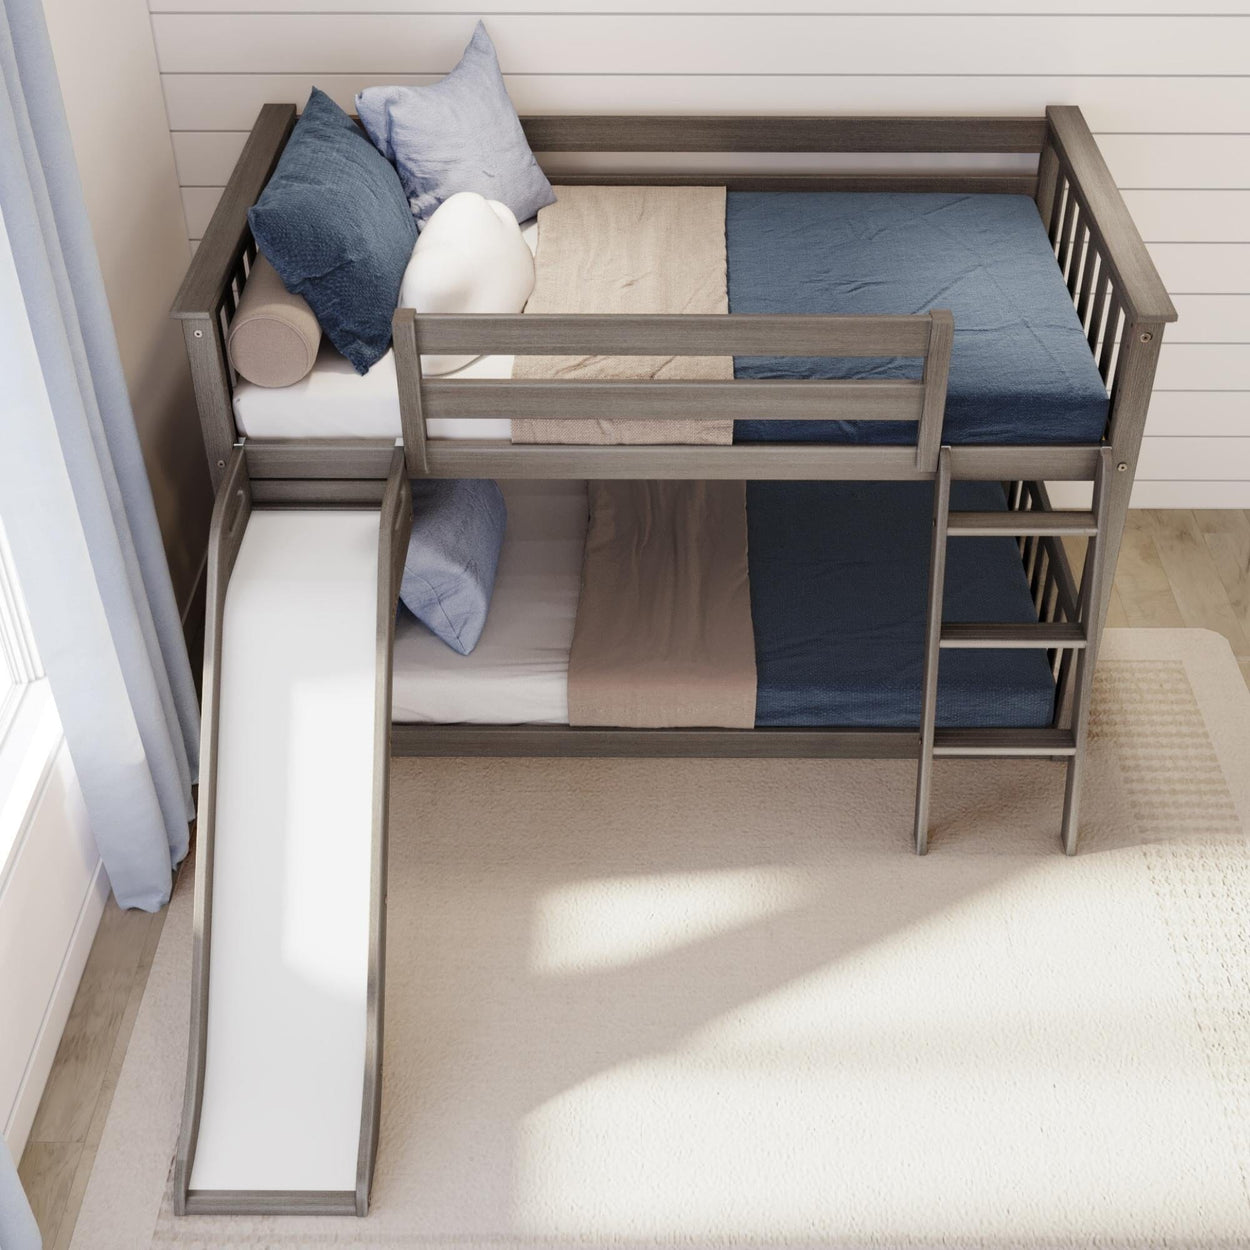 180417-151 : Bunk Beds Max & Lily Twin Over Twin Low Bunk with Slide and Ladder, Wooden Bunk beds with 14” Safety Guardrail for Kids, Toddlers, Boys, Girls, Teens, Bedroom Furniture, Clay